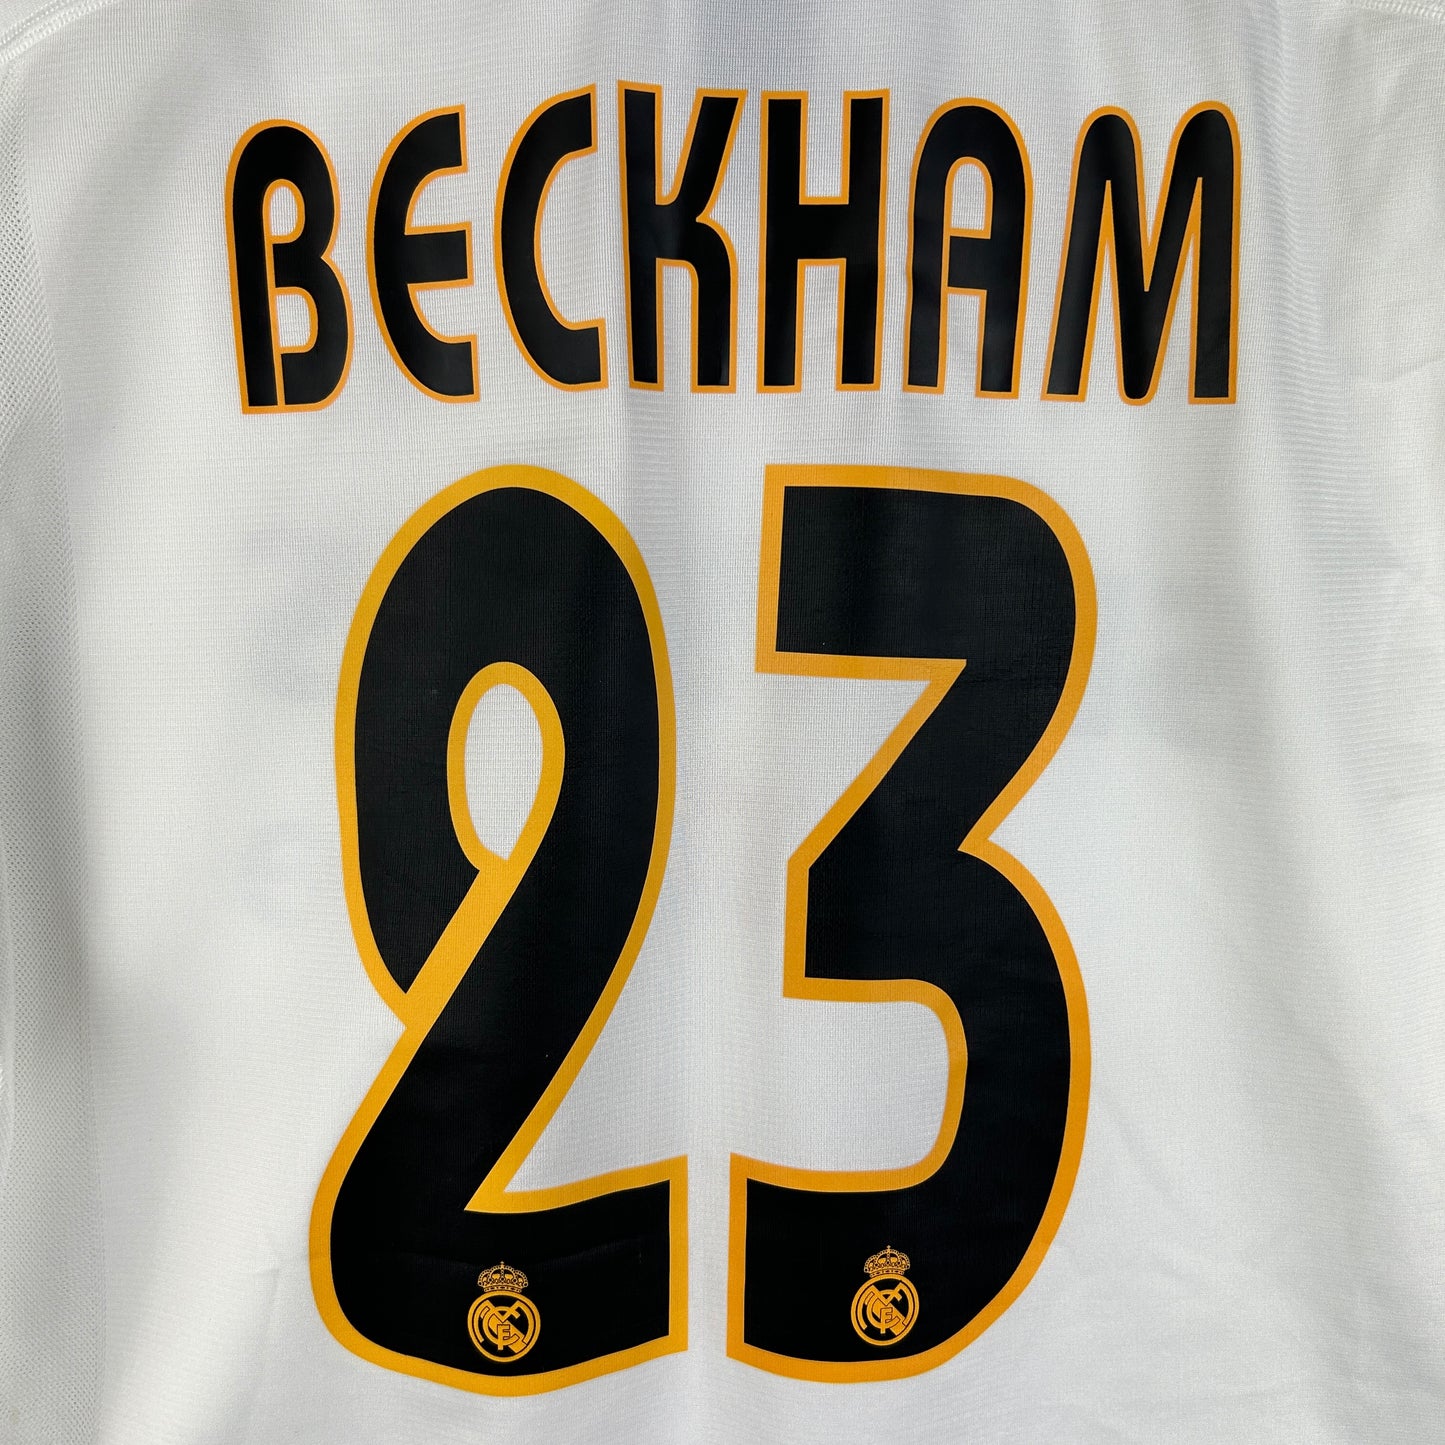 Real Madrid 2003/2004 Player Issue Home Shirt - Beckham 23